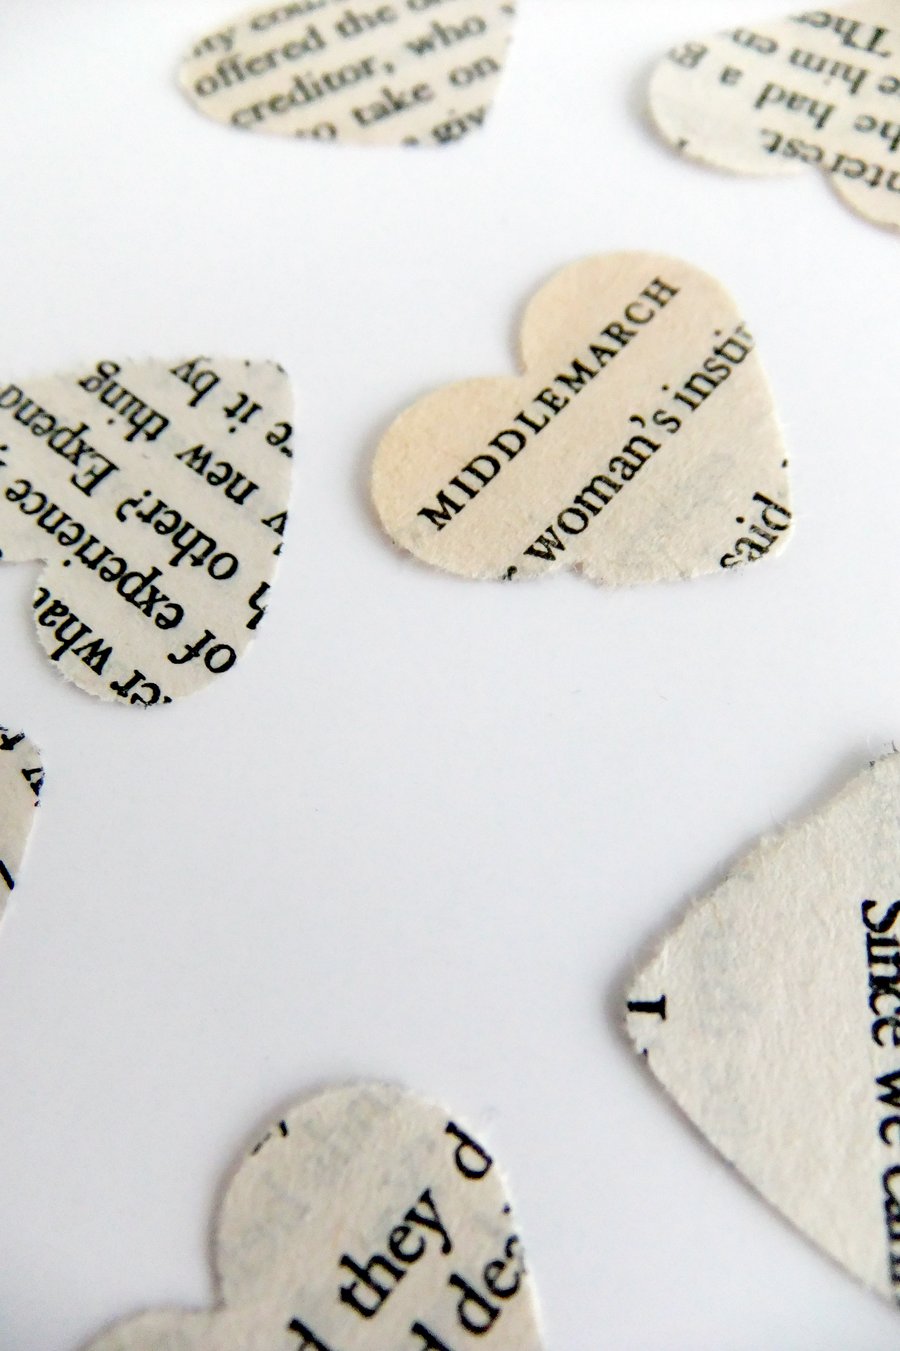 Middlemarch paper hearts -1 inch hearts - recycled confetti - 500 hearts